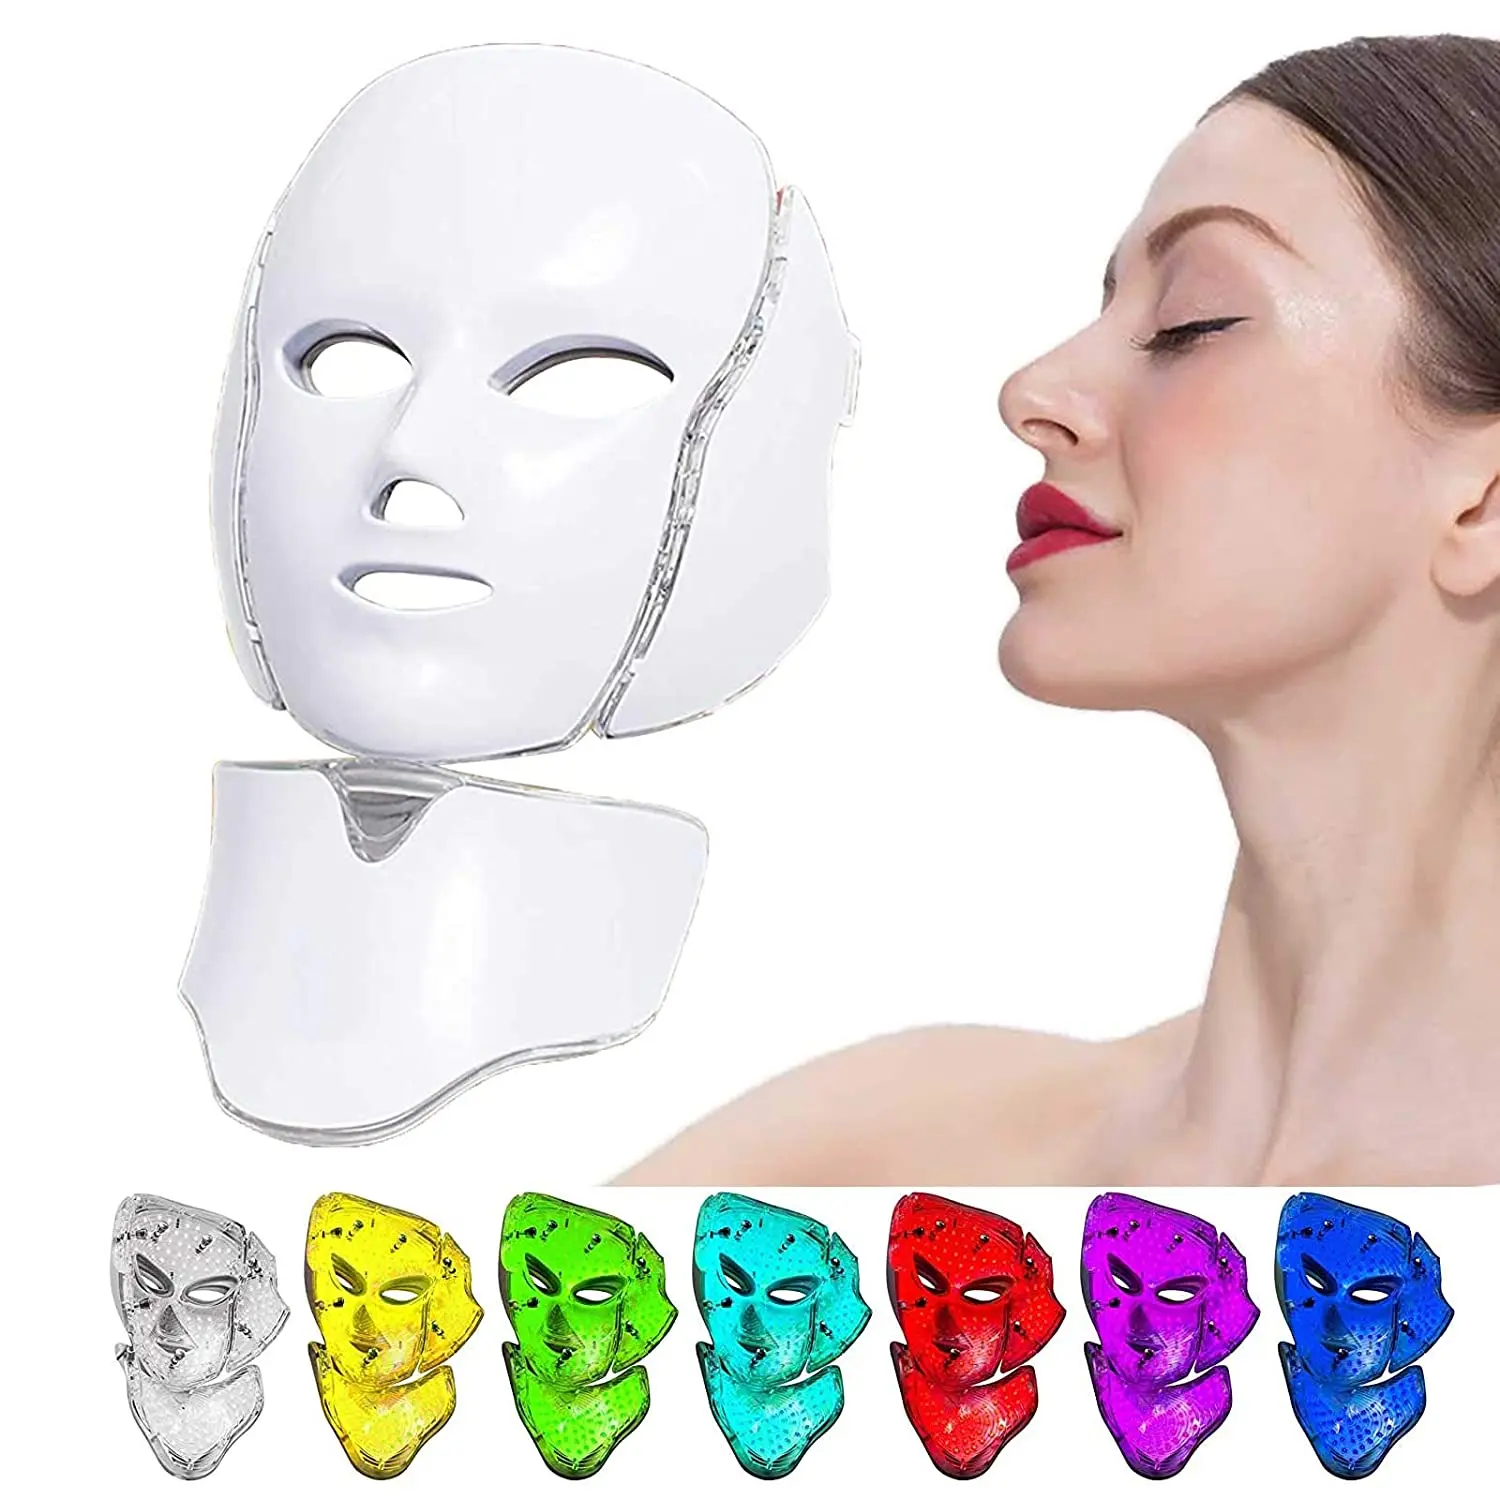 Ny-Fm01 Amazon Hot Sale Fba Usa Blue & Red Light Treatment Acne Photon Korea Pdt Technology For Acne Reduction Led Mask Therapy